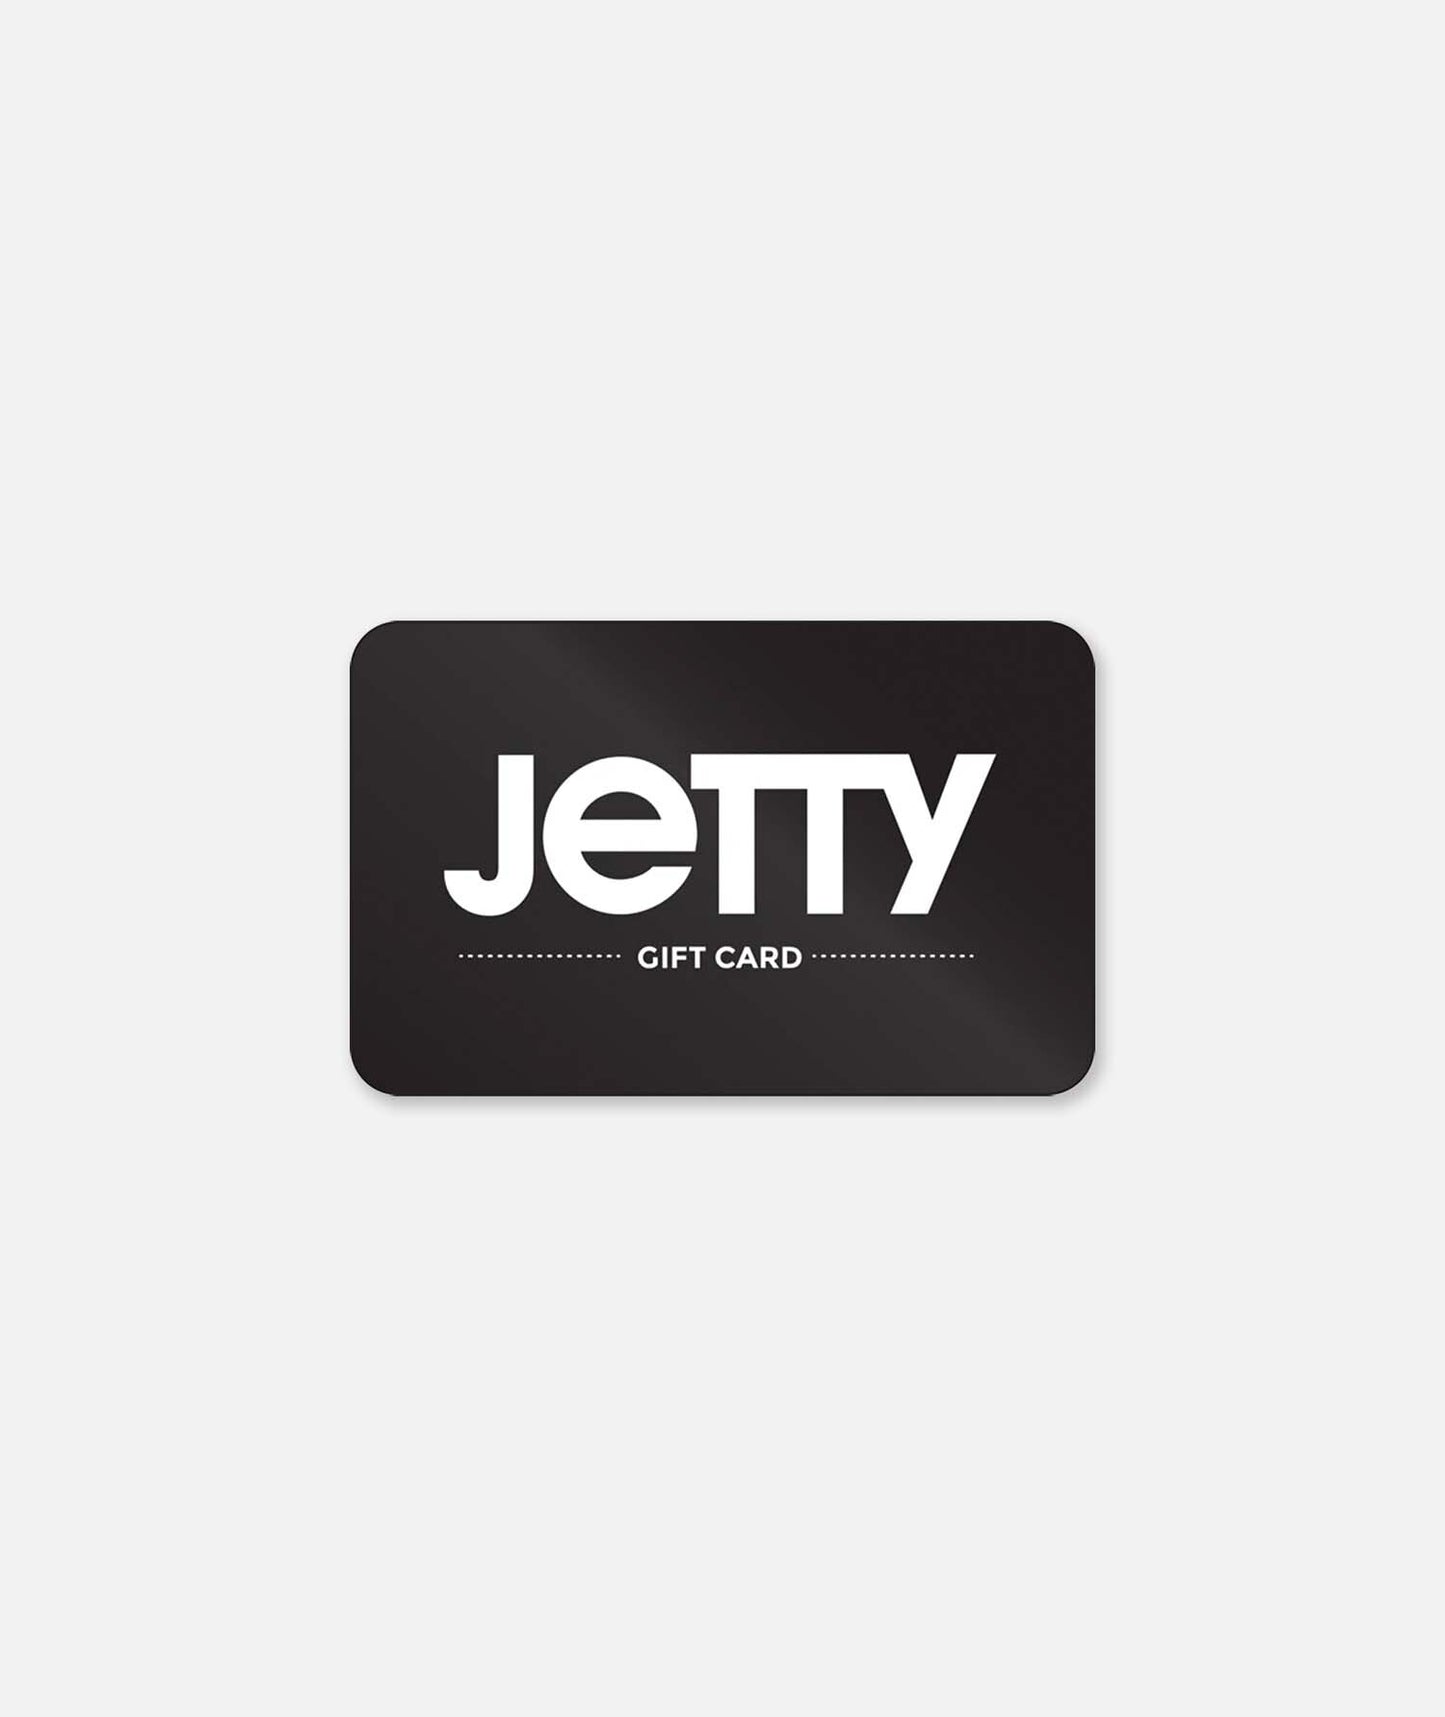 Jetty Physical Gift Card $50